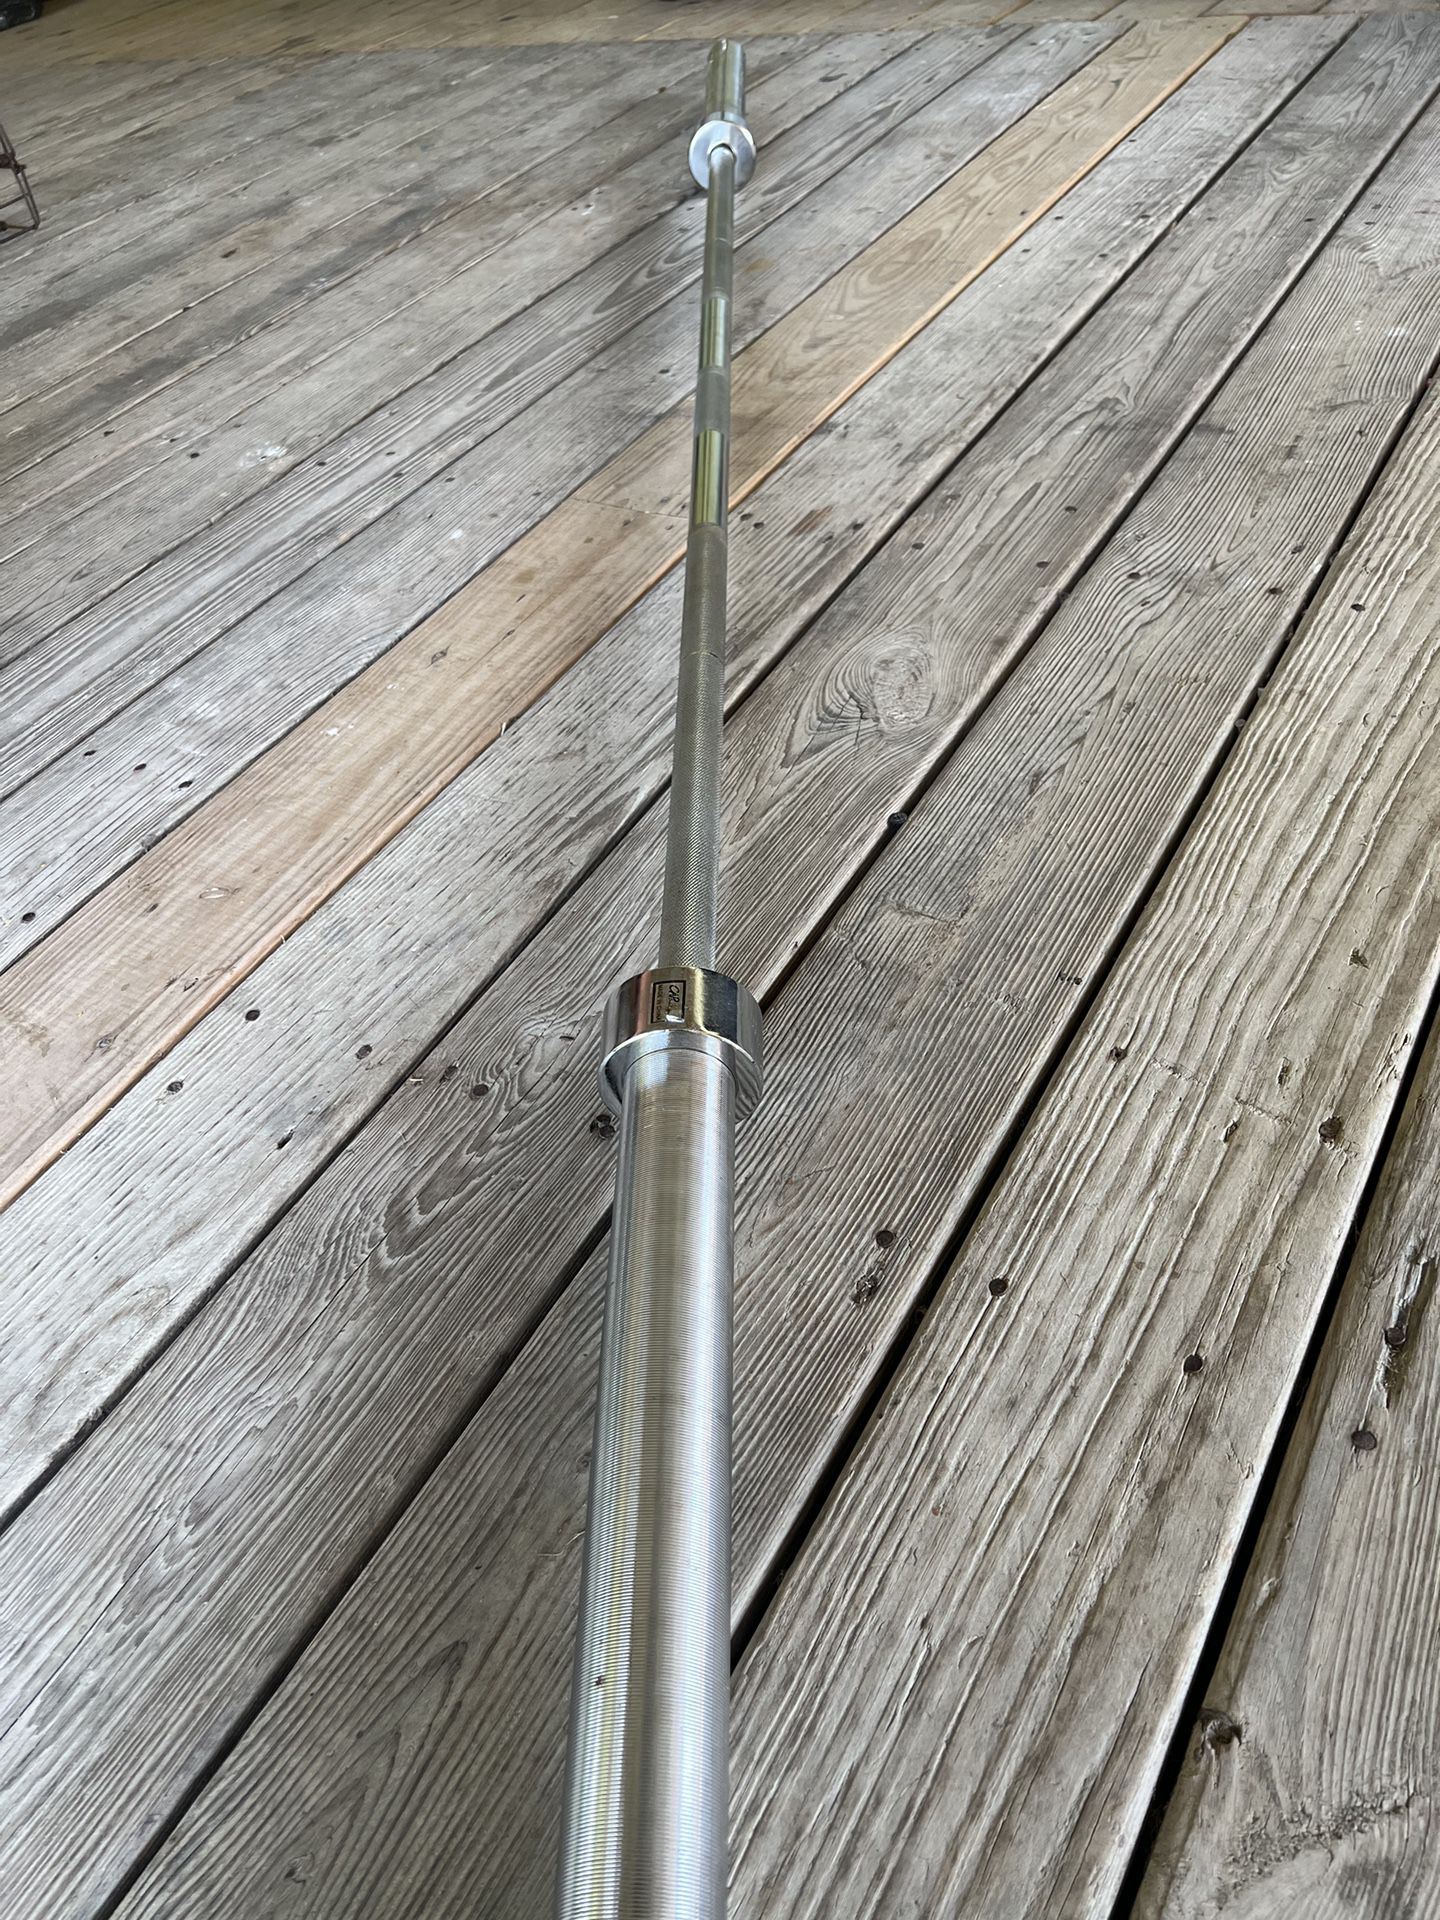 Solid 45Lb Olympic Barbell 7ft $ 70